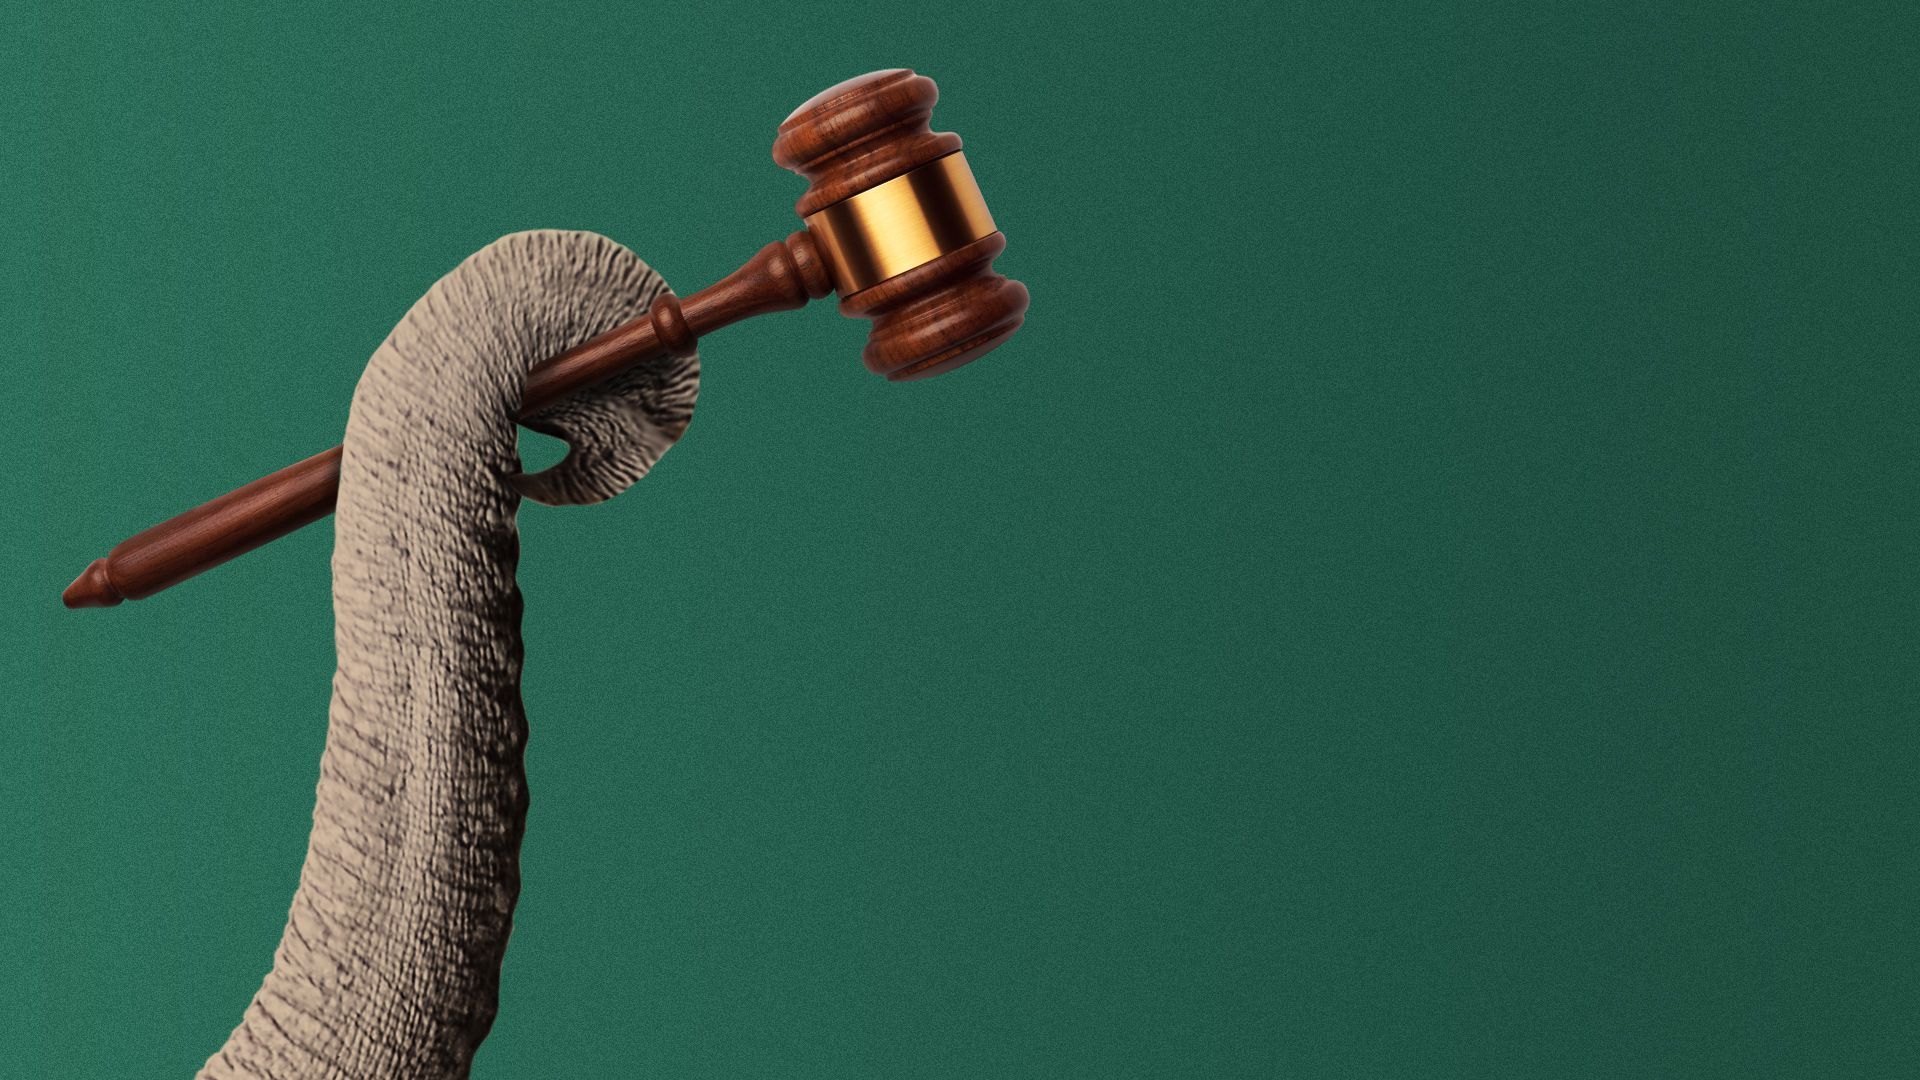 Illustration of an elephant's trunk holding a gavel.